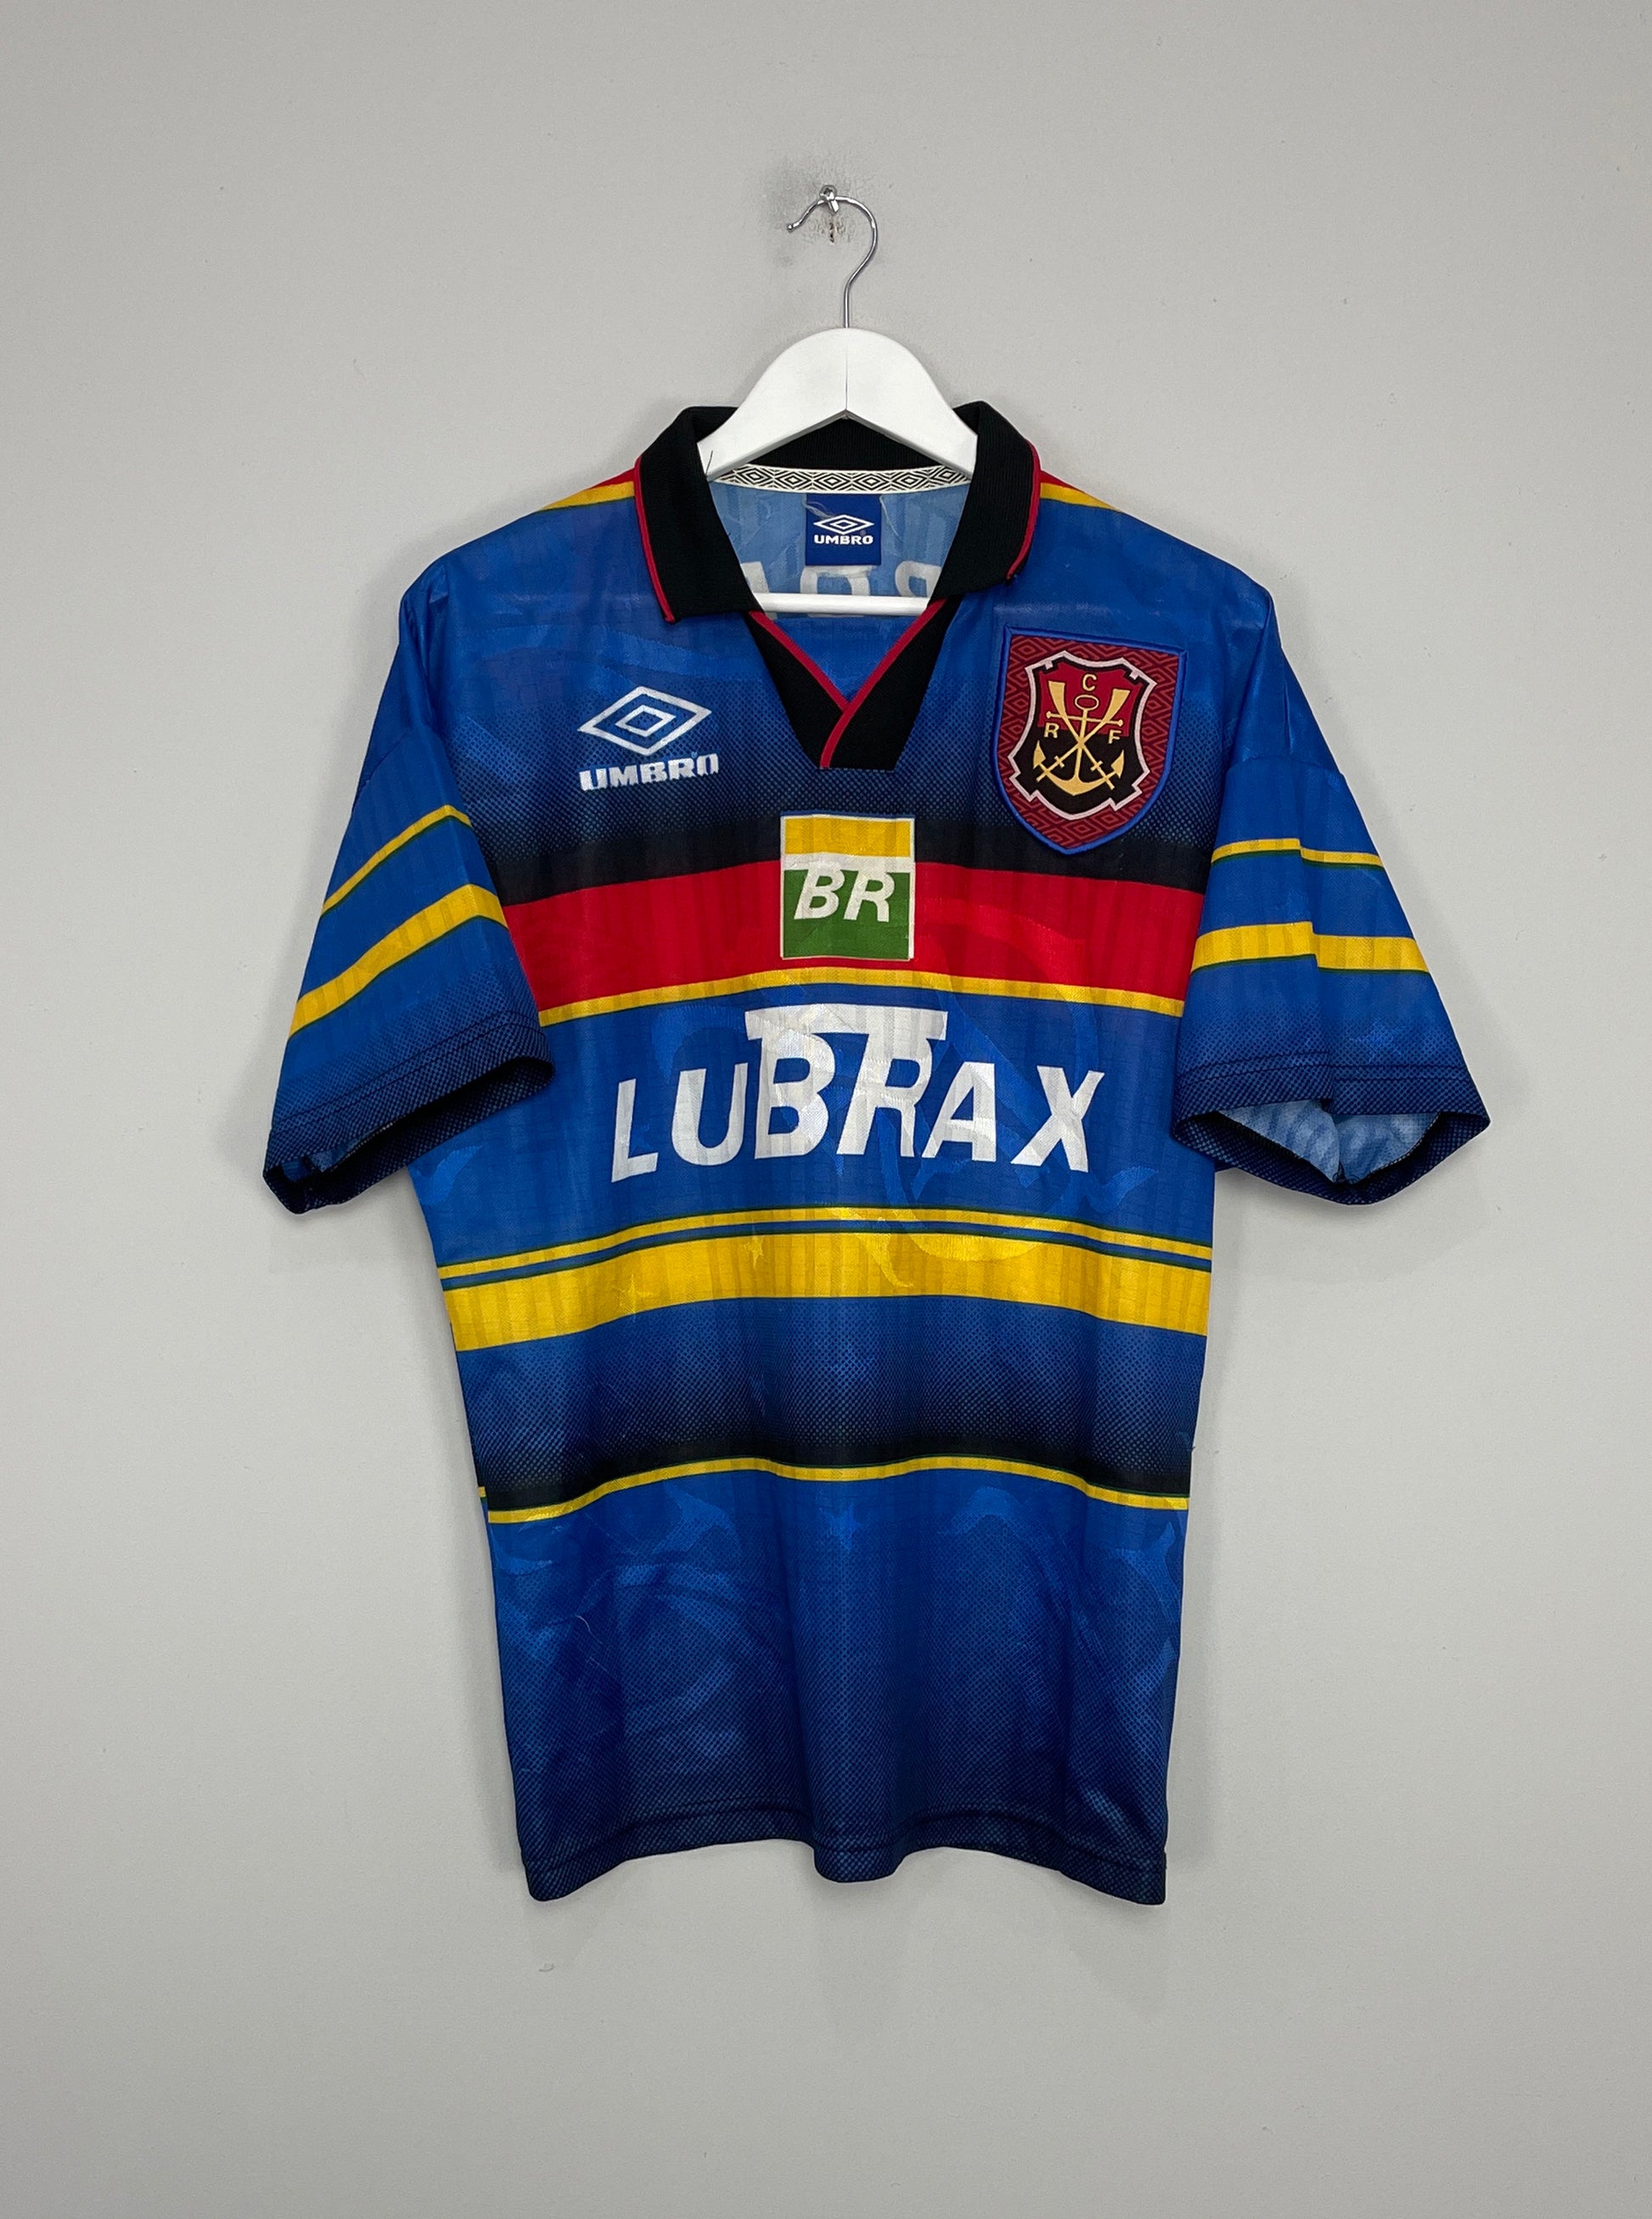 Image of the Flamengo shirt from the 1995/96 season